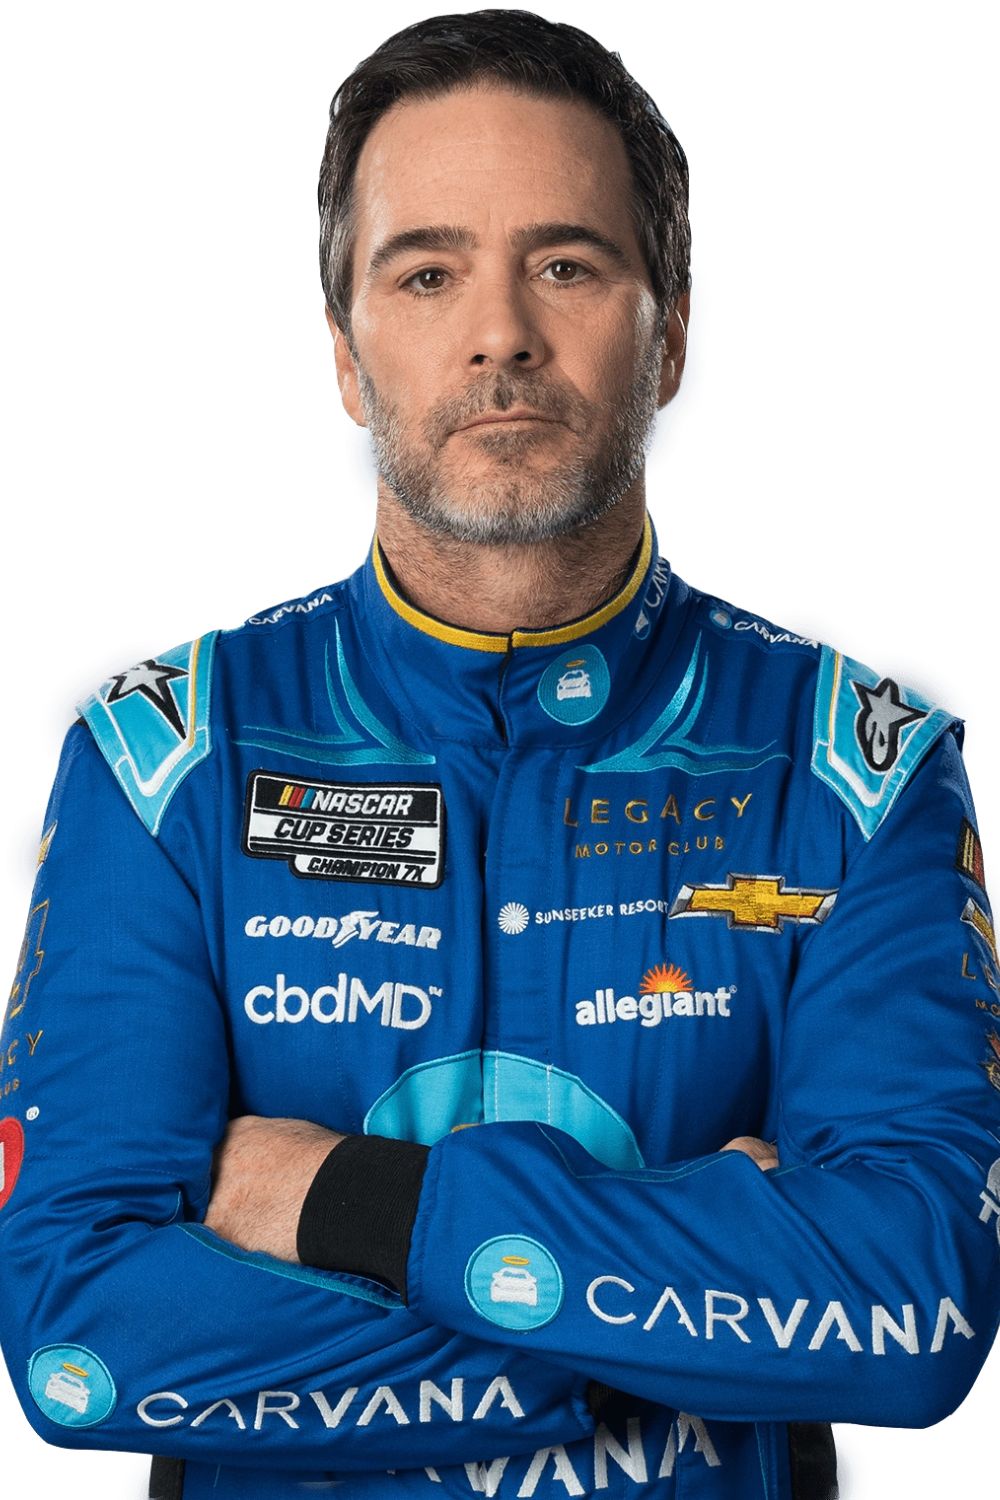 Jimmie Johnson, An American Professional Auto Racing Driver